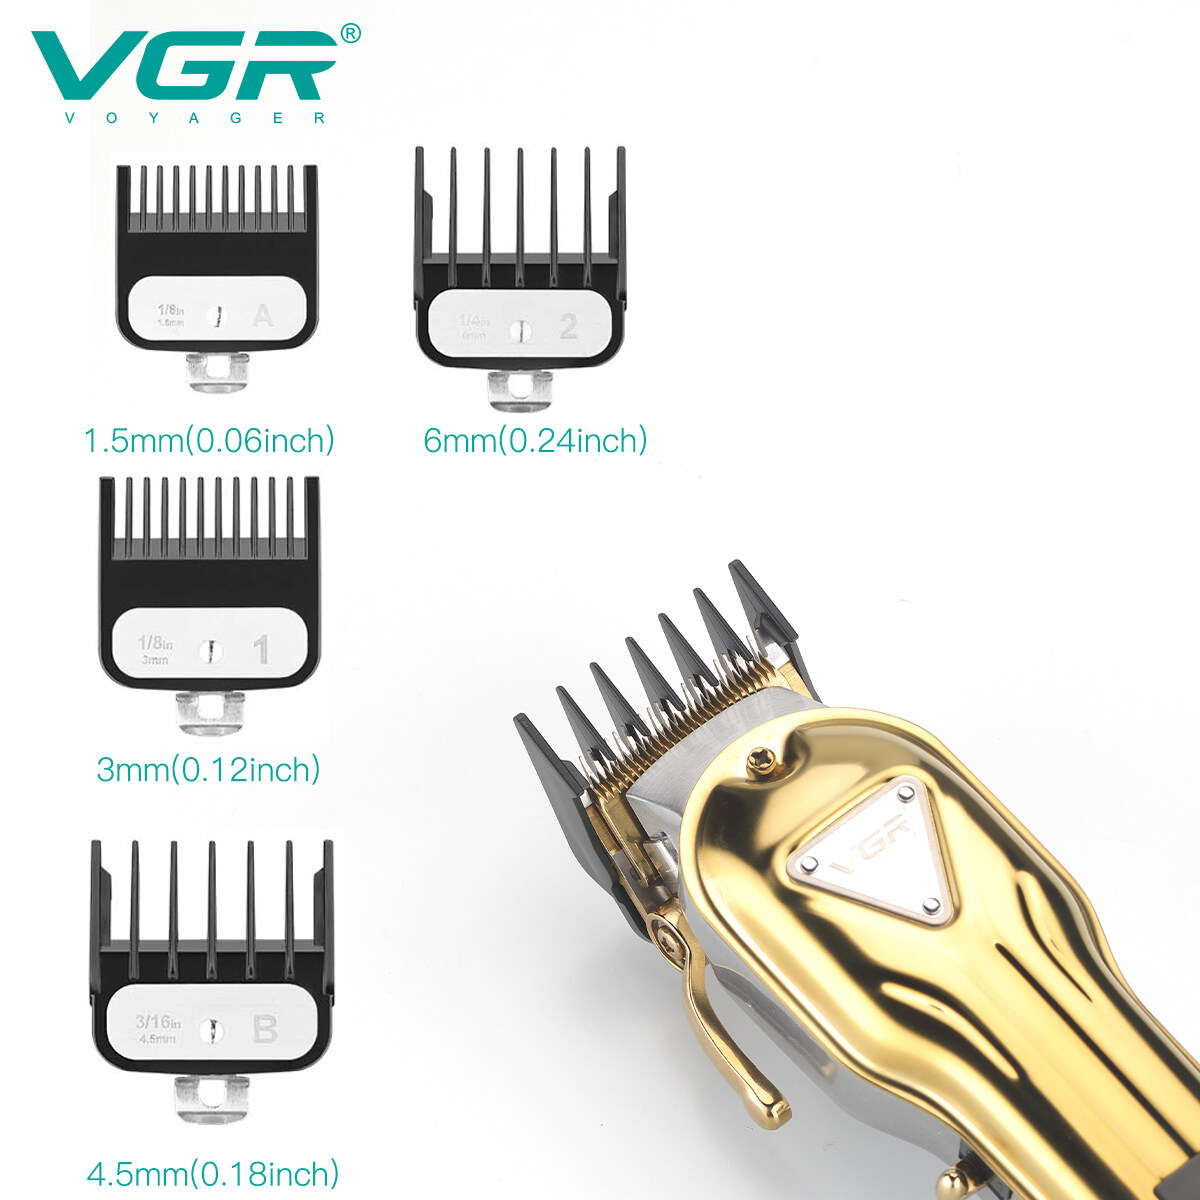 china rechargeable cordless hair clipper, cordless rechargeable hair clipper factory, cordless rechargeable hair clipper supplier, Cordless Rechargeable Hair Clippers, Custom Rechargeable Cordless Hair Clippers, Rechargeable Cordless Hair Clippers, Wholesale Rechargeable Cordless Hair Clippers